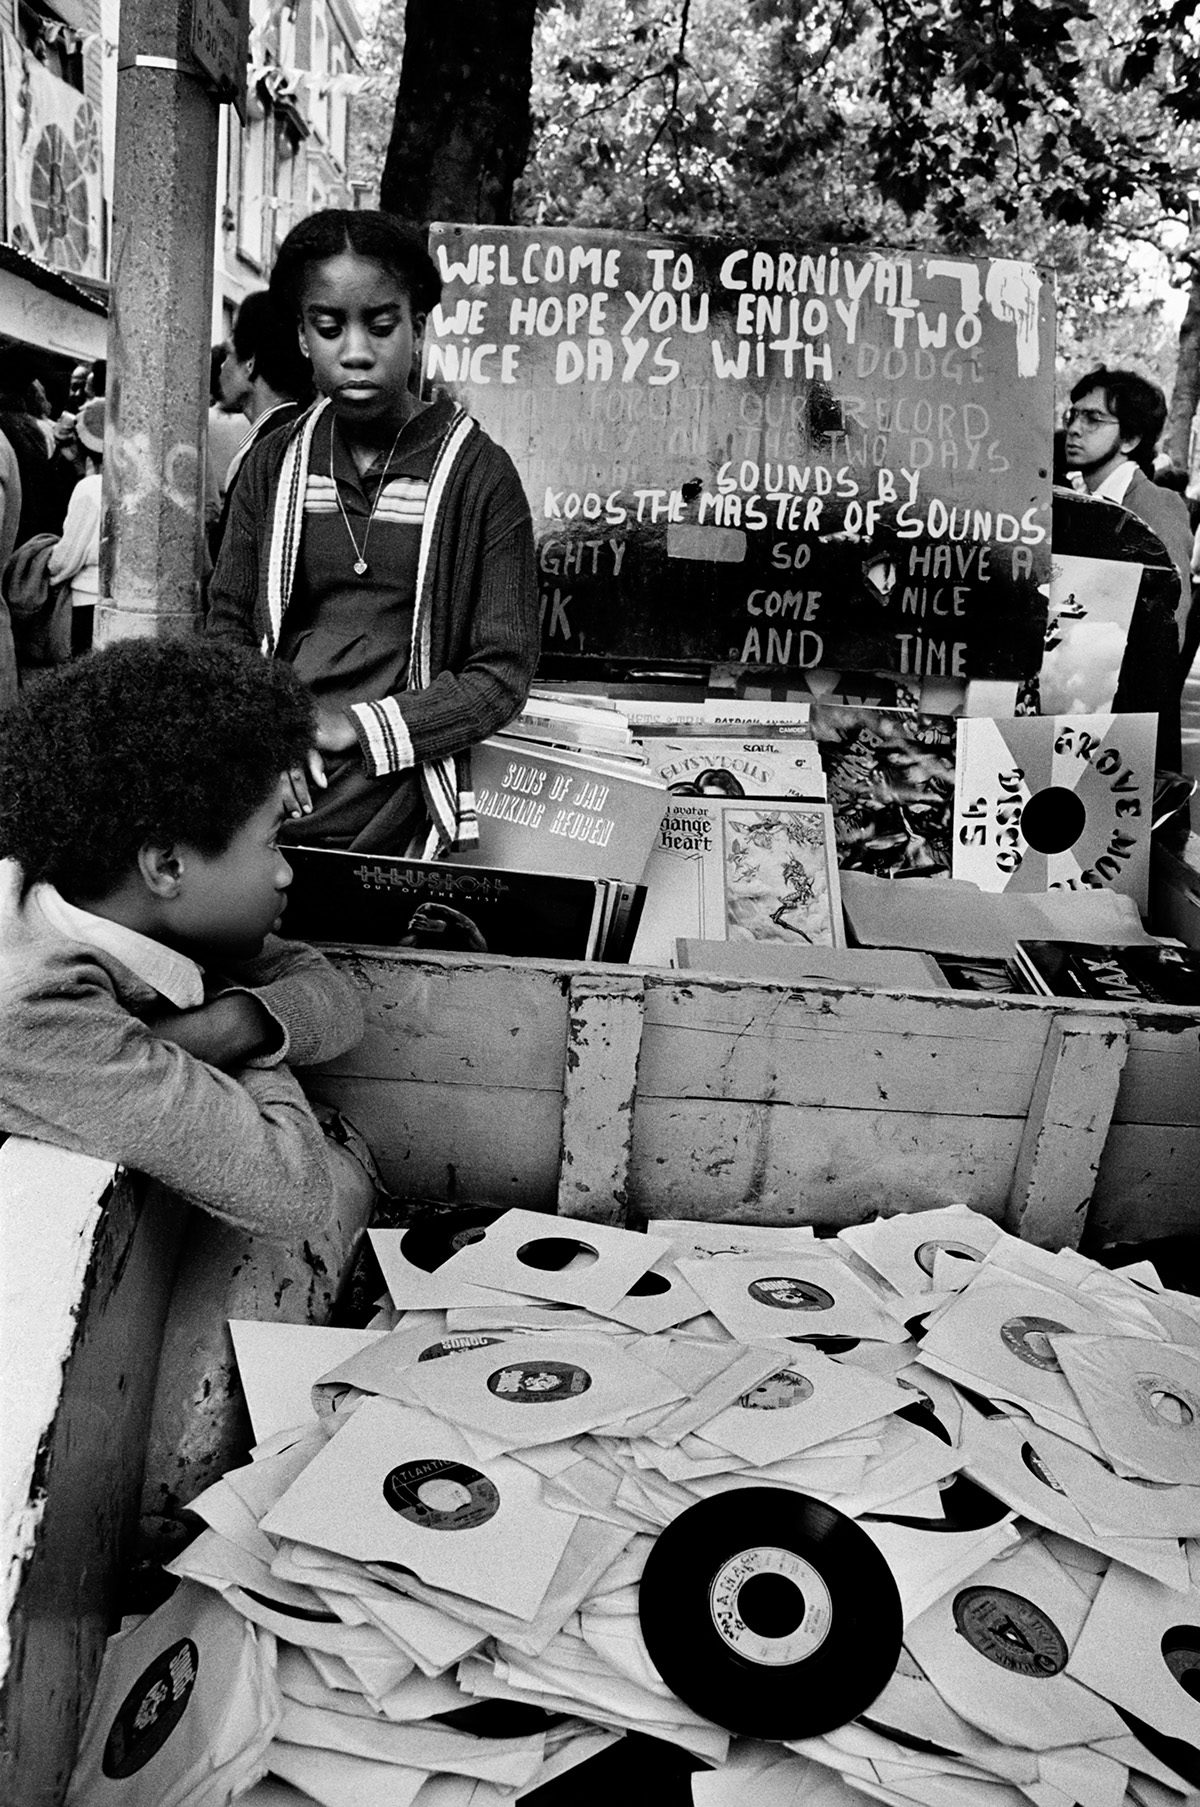 Black and white photo of two young people sat next to a large container filled with vinyl records